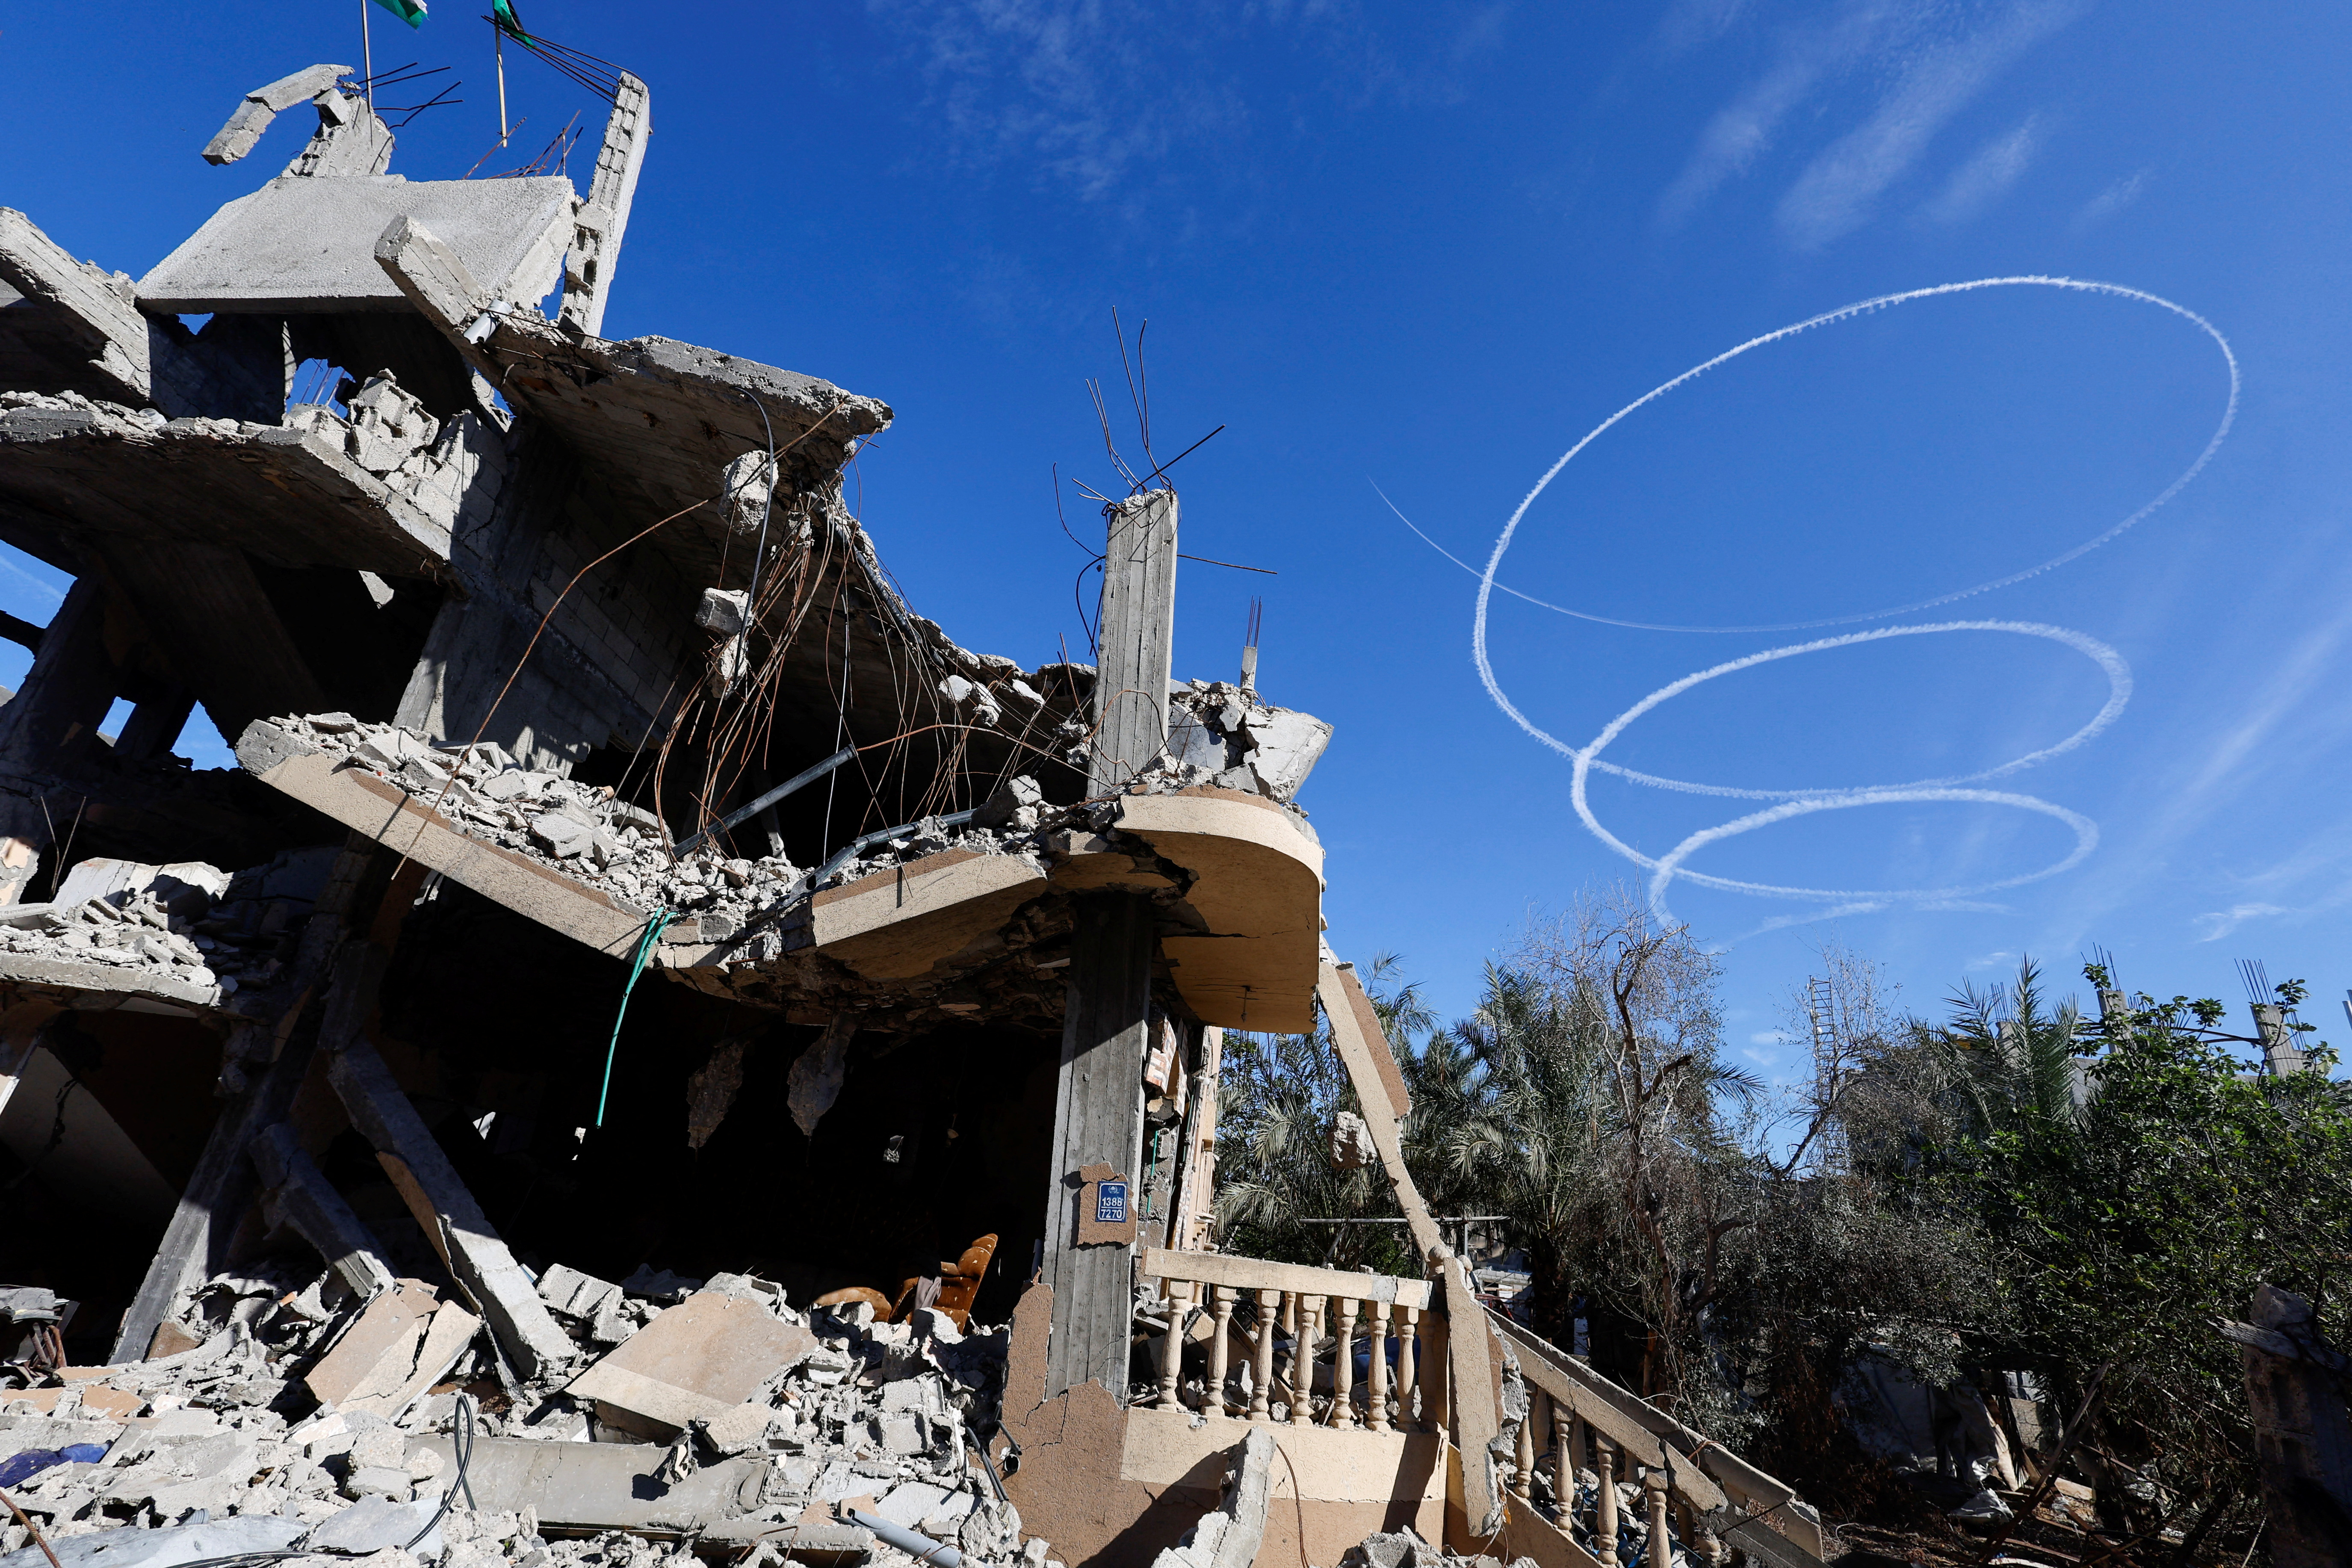 Israel aircrafts leave trails near the ruins of houses destroyed during the conflict in Khan Younis, Gaza. /Mohammed Salem/Reuters
